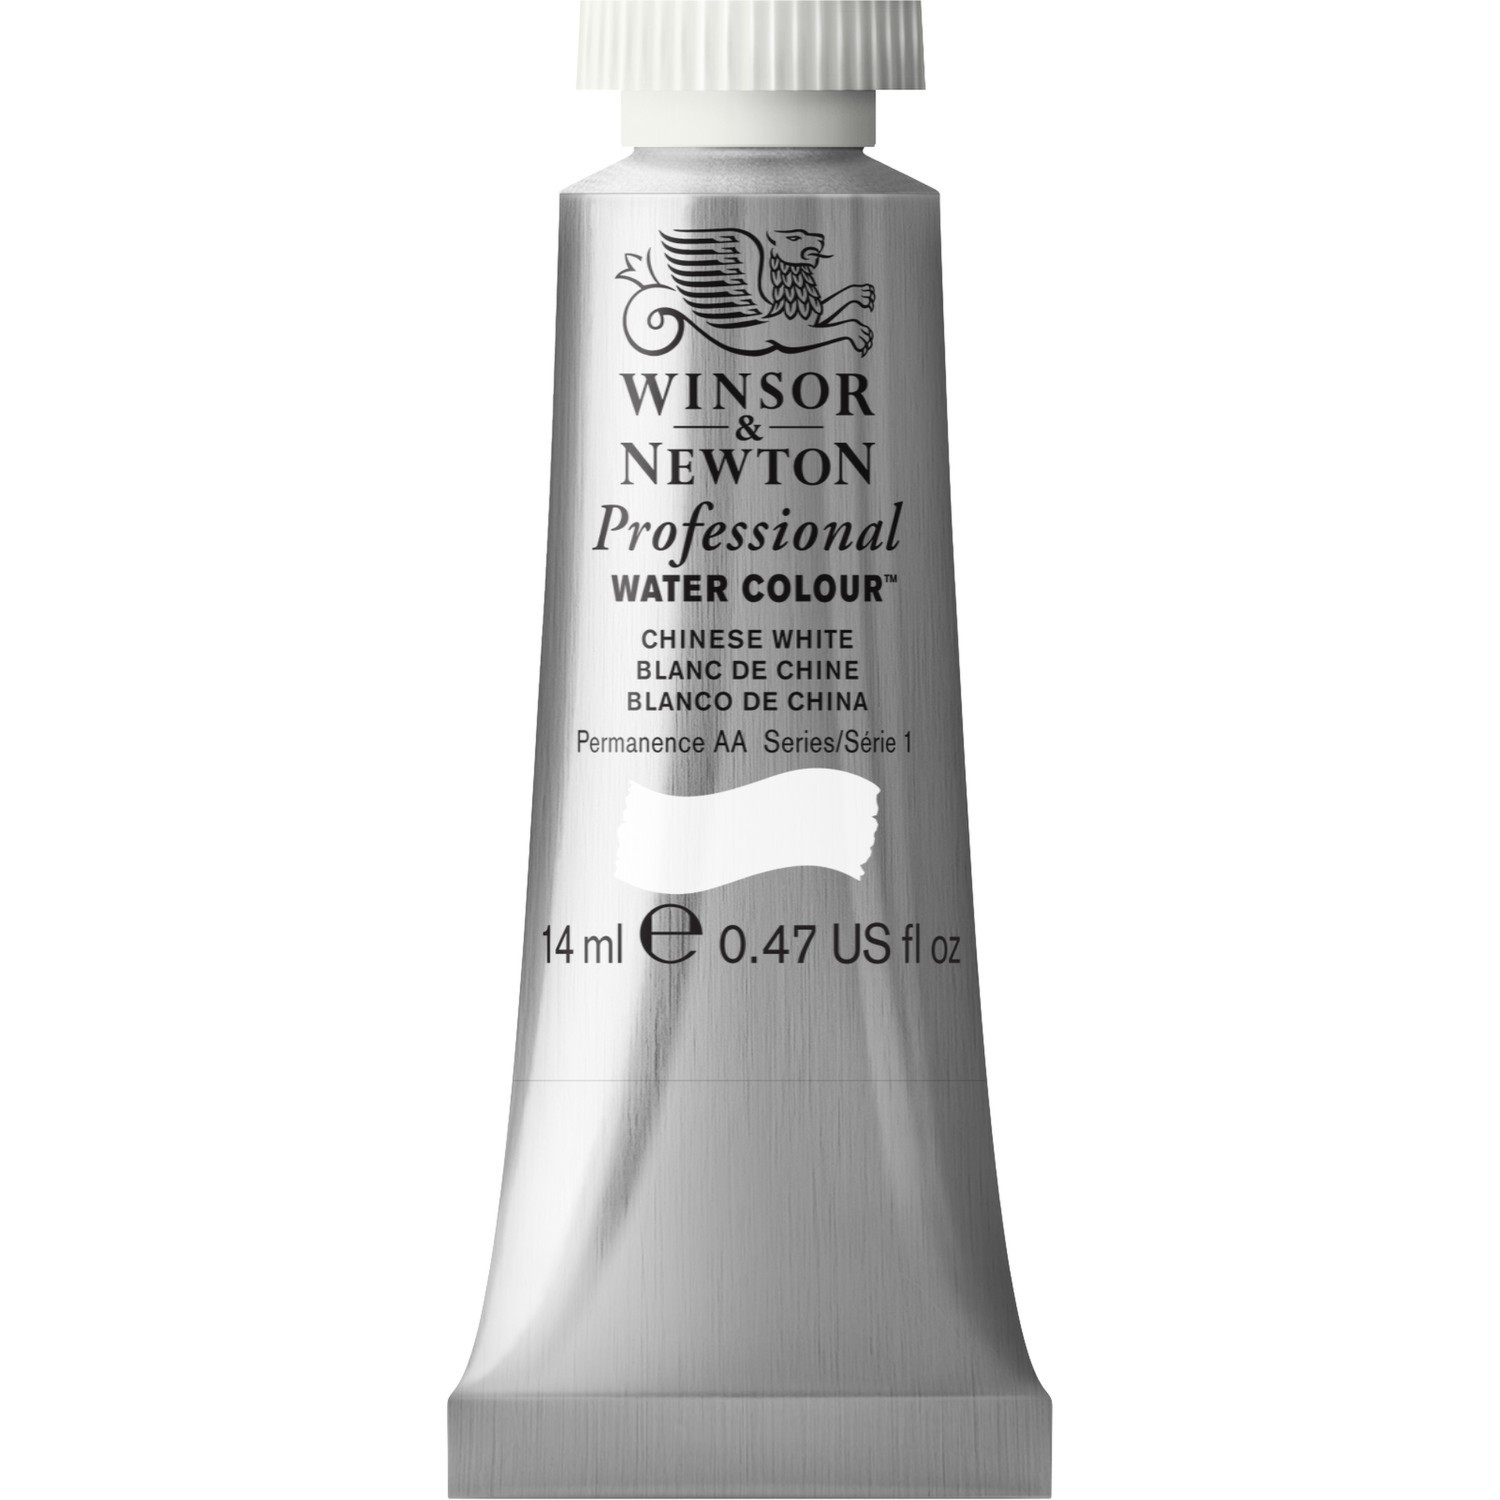 Winsor and Newton 14ml Professional Watercolour Paint - Chinese White Image